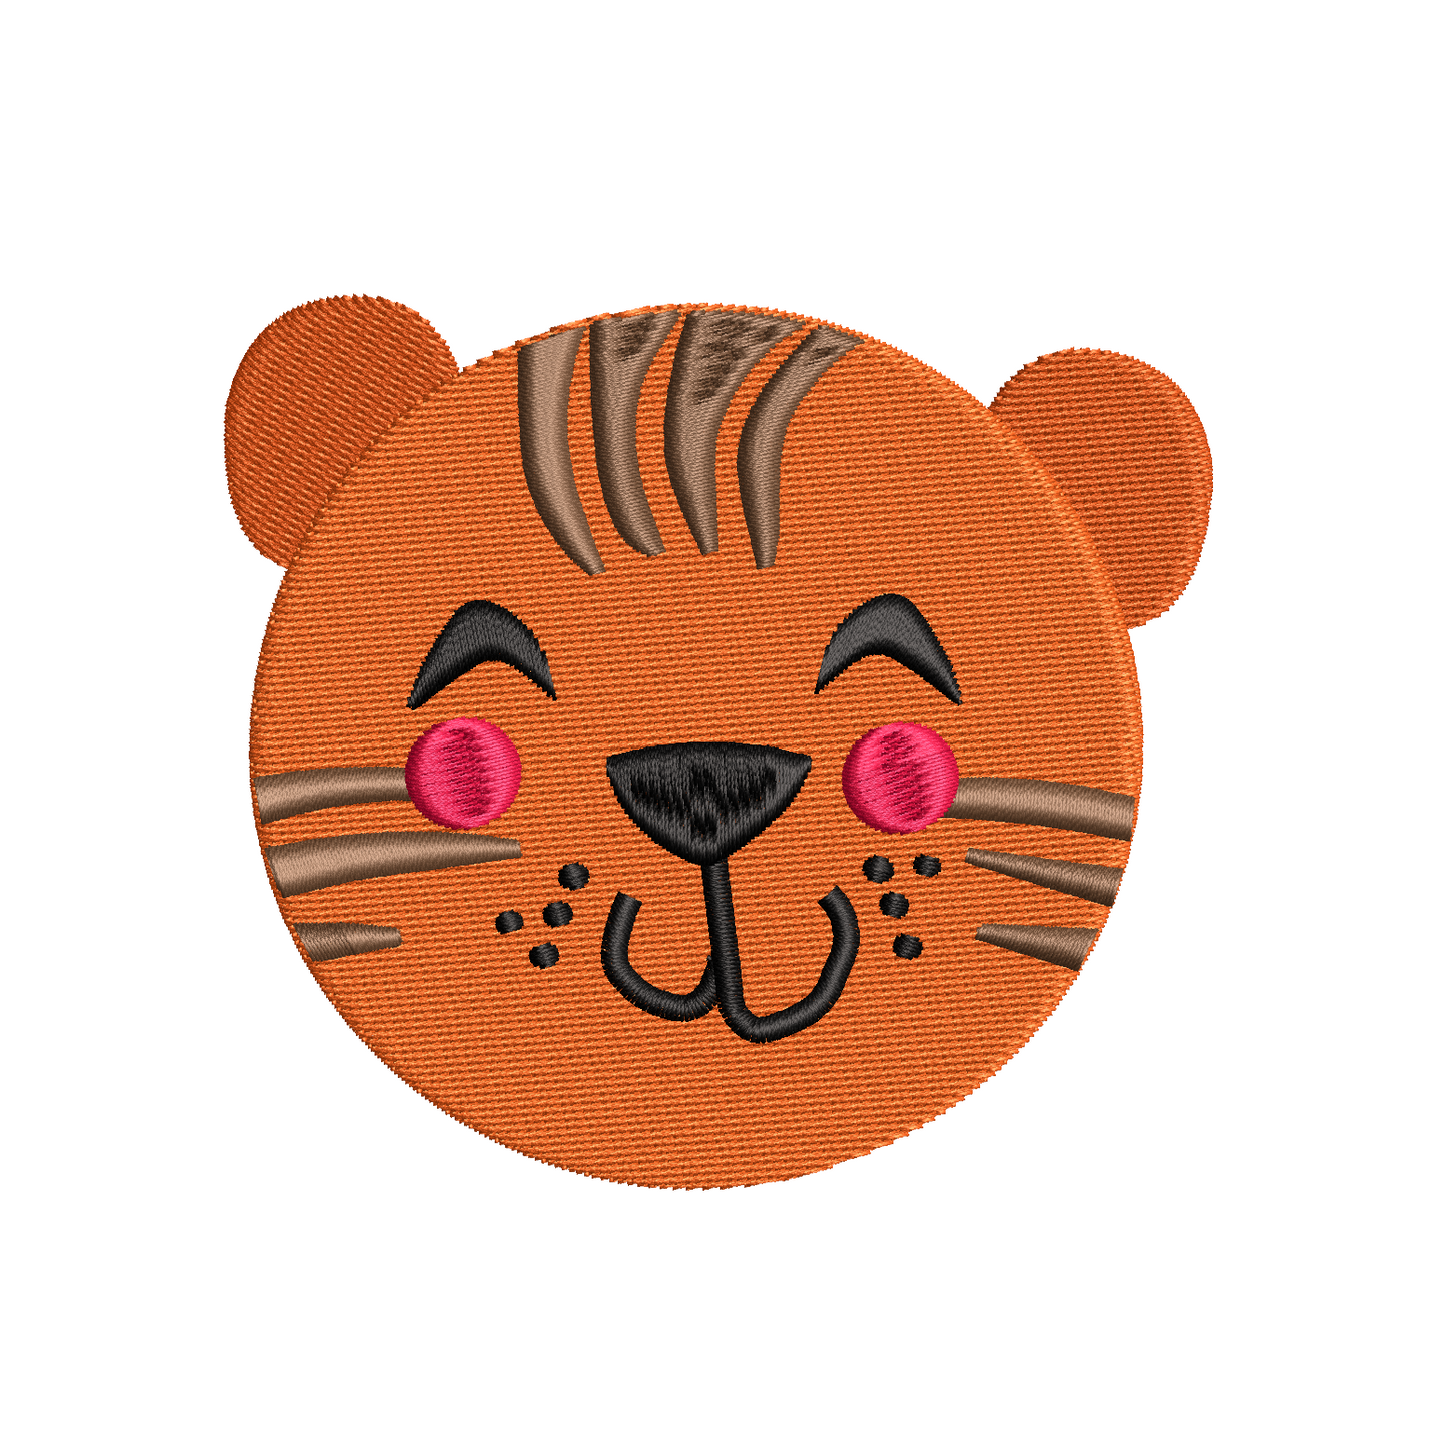 Tiger face fill stitch embroidery design by rosiedayembroidery.com